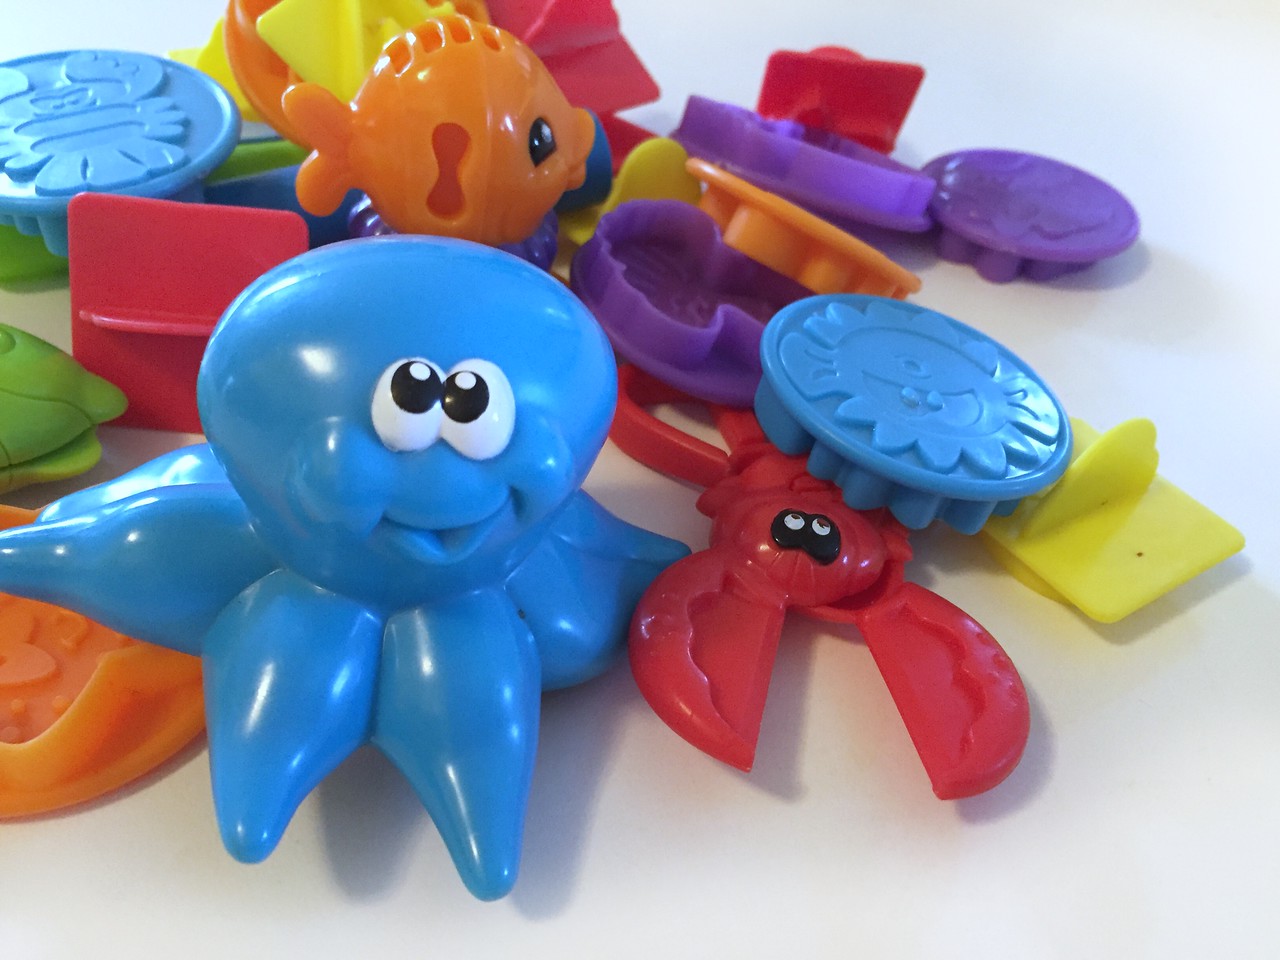 Play Doh toys undersea and fun with numbers